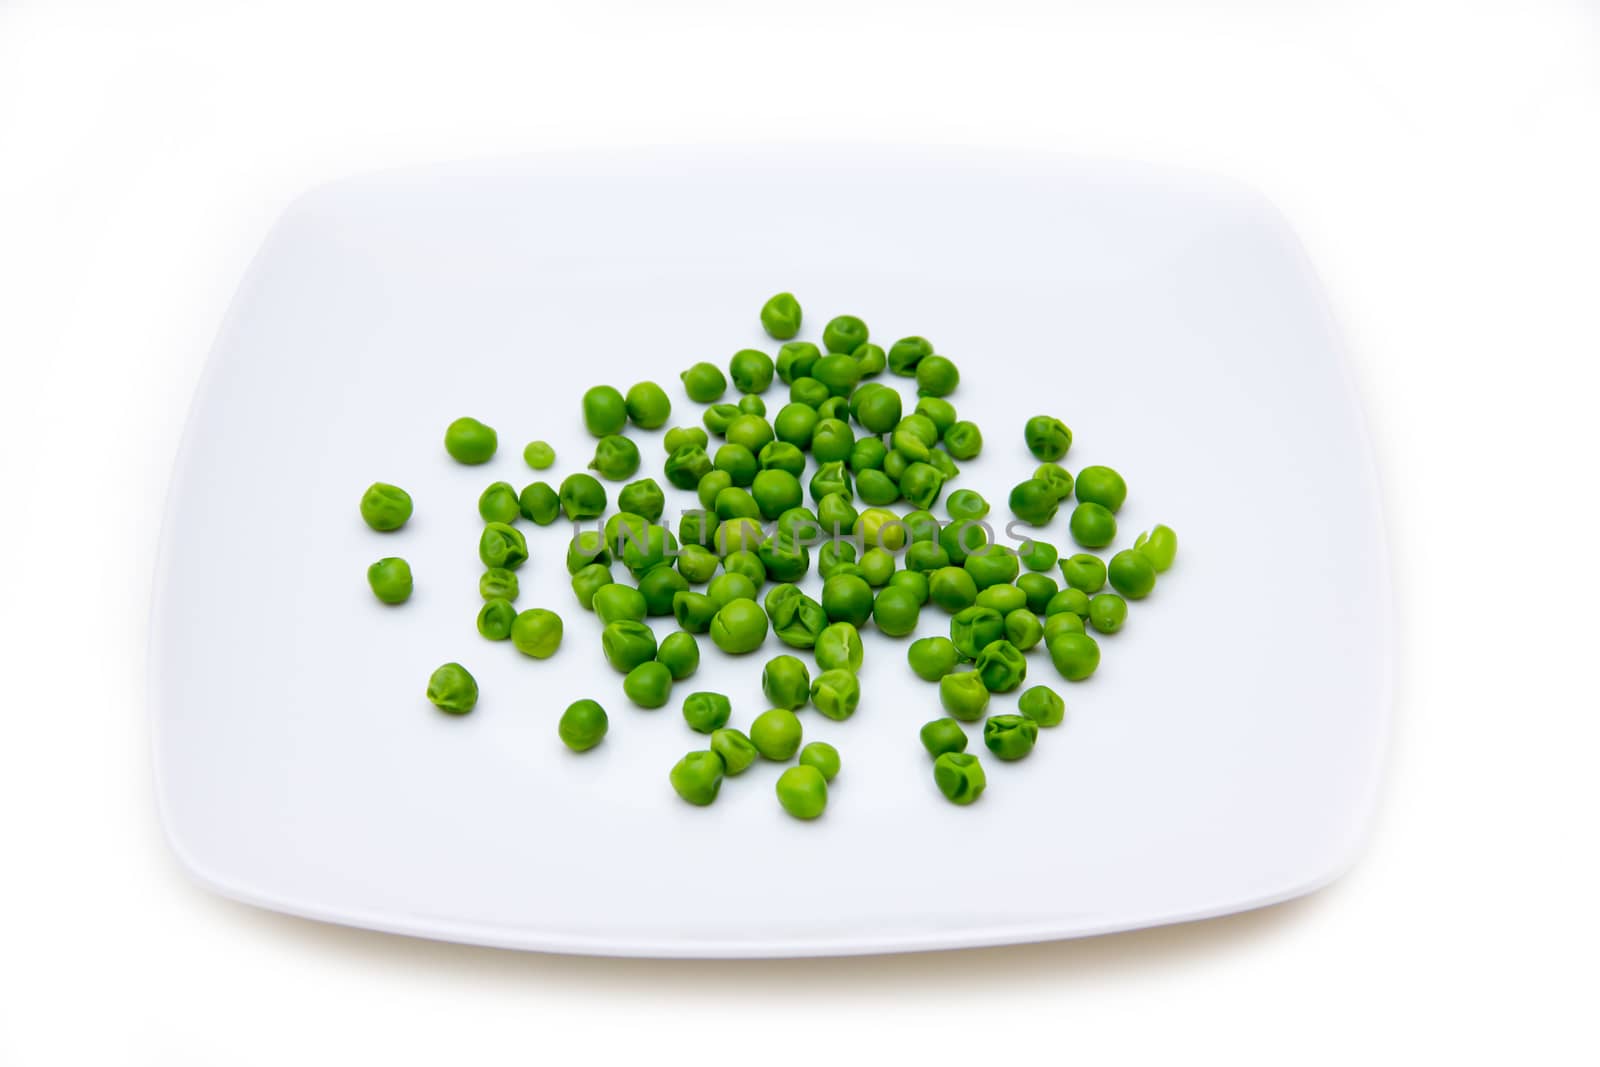 Plate with peas by spafra